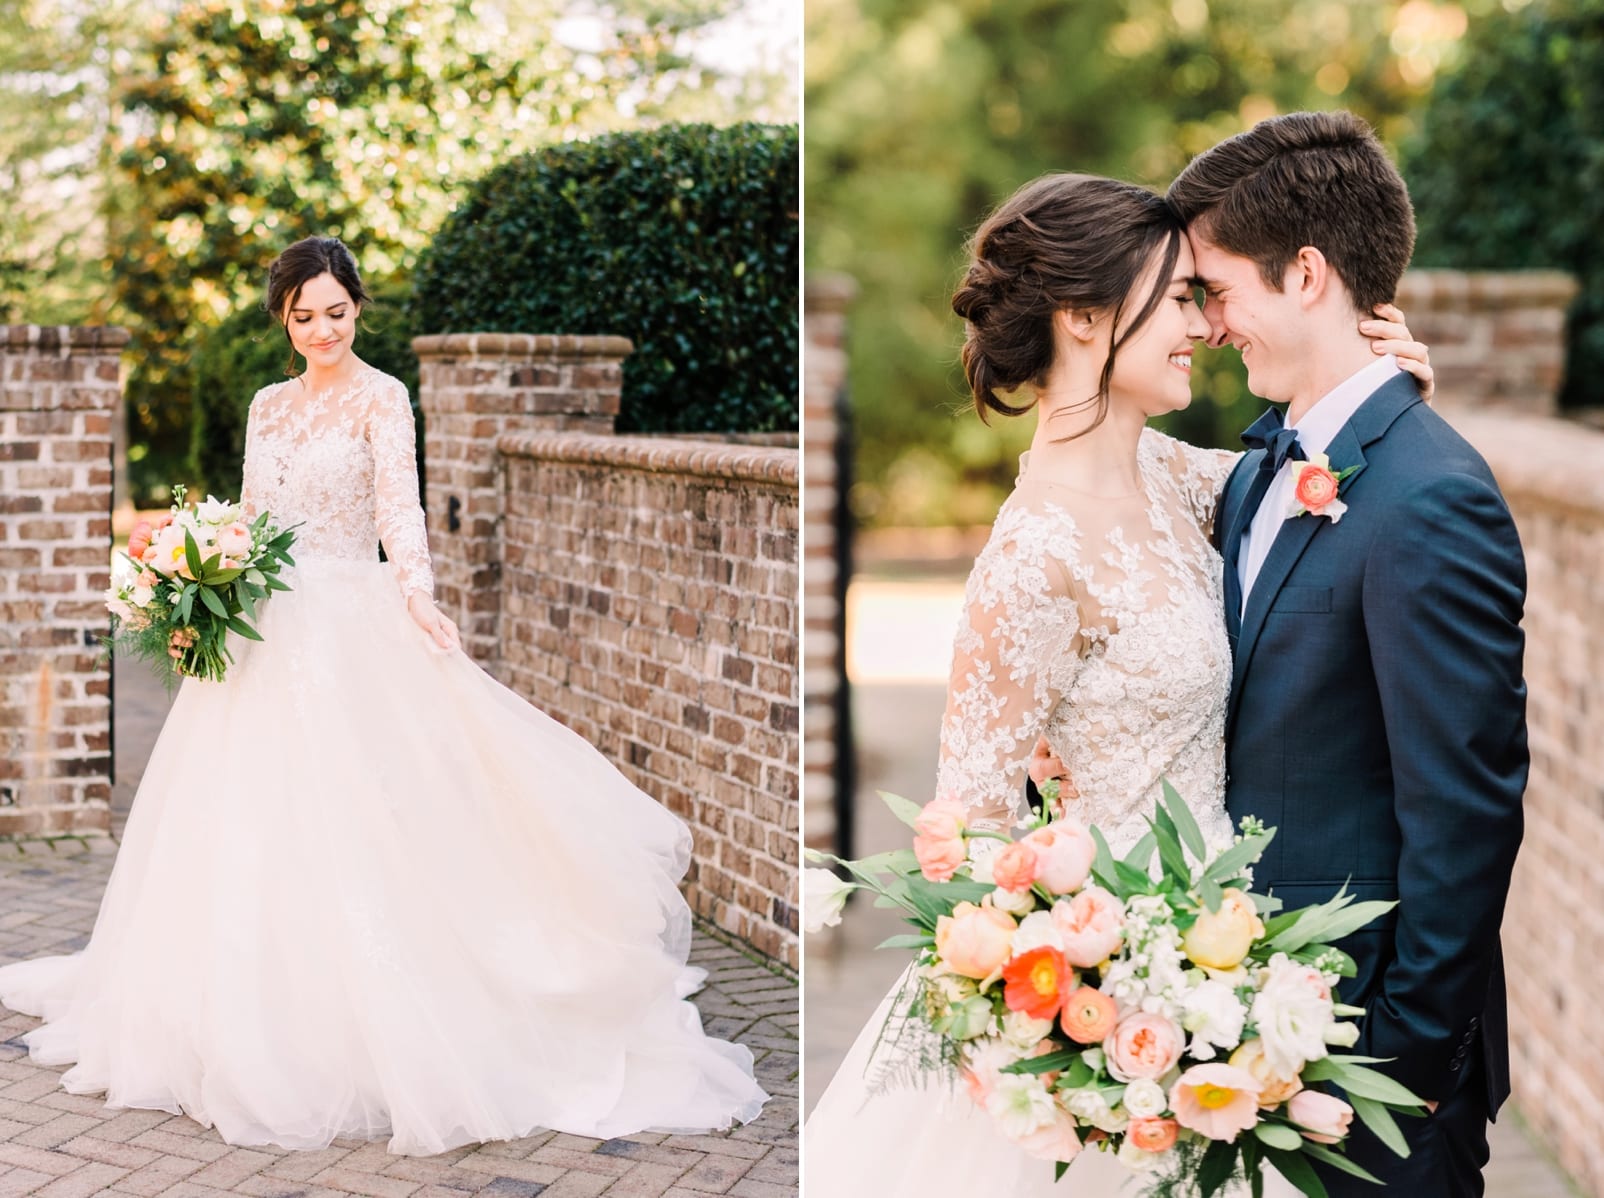 teighla norris hair and makeup on bride with cascading bridal bouquet photo